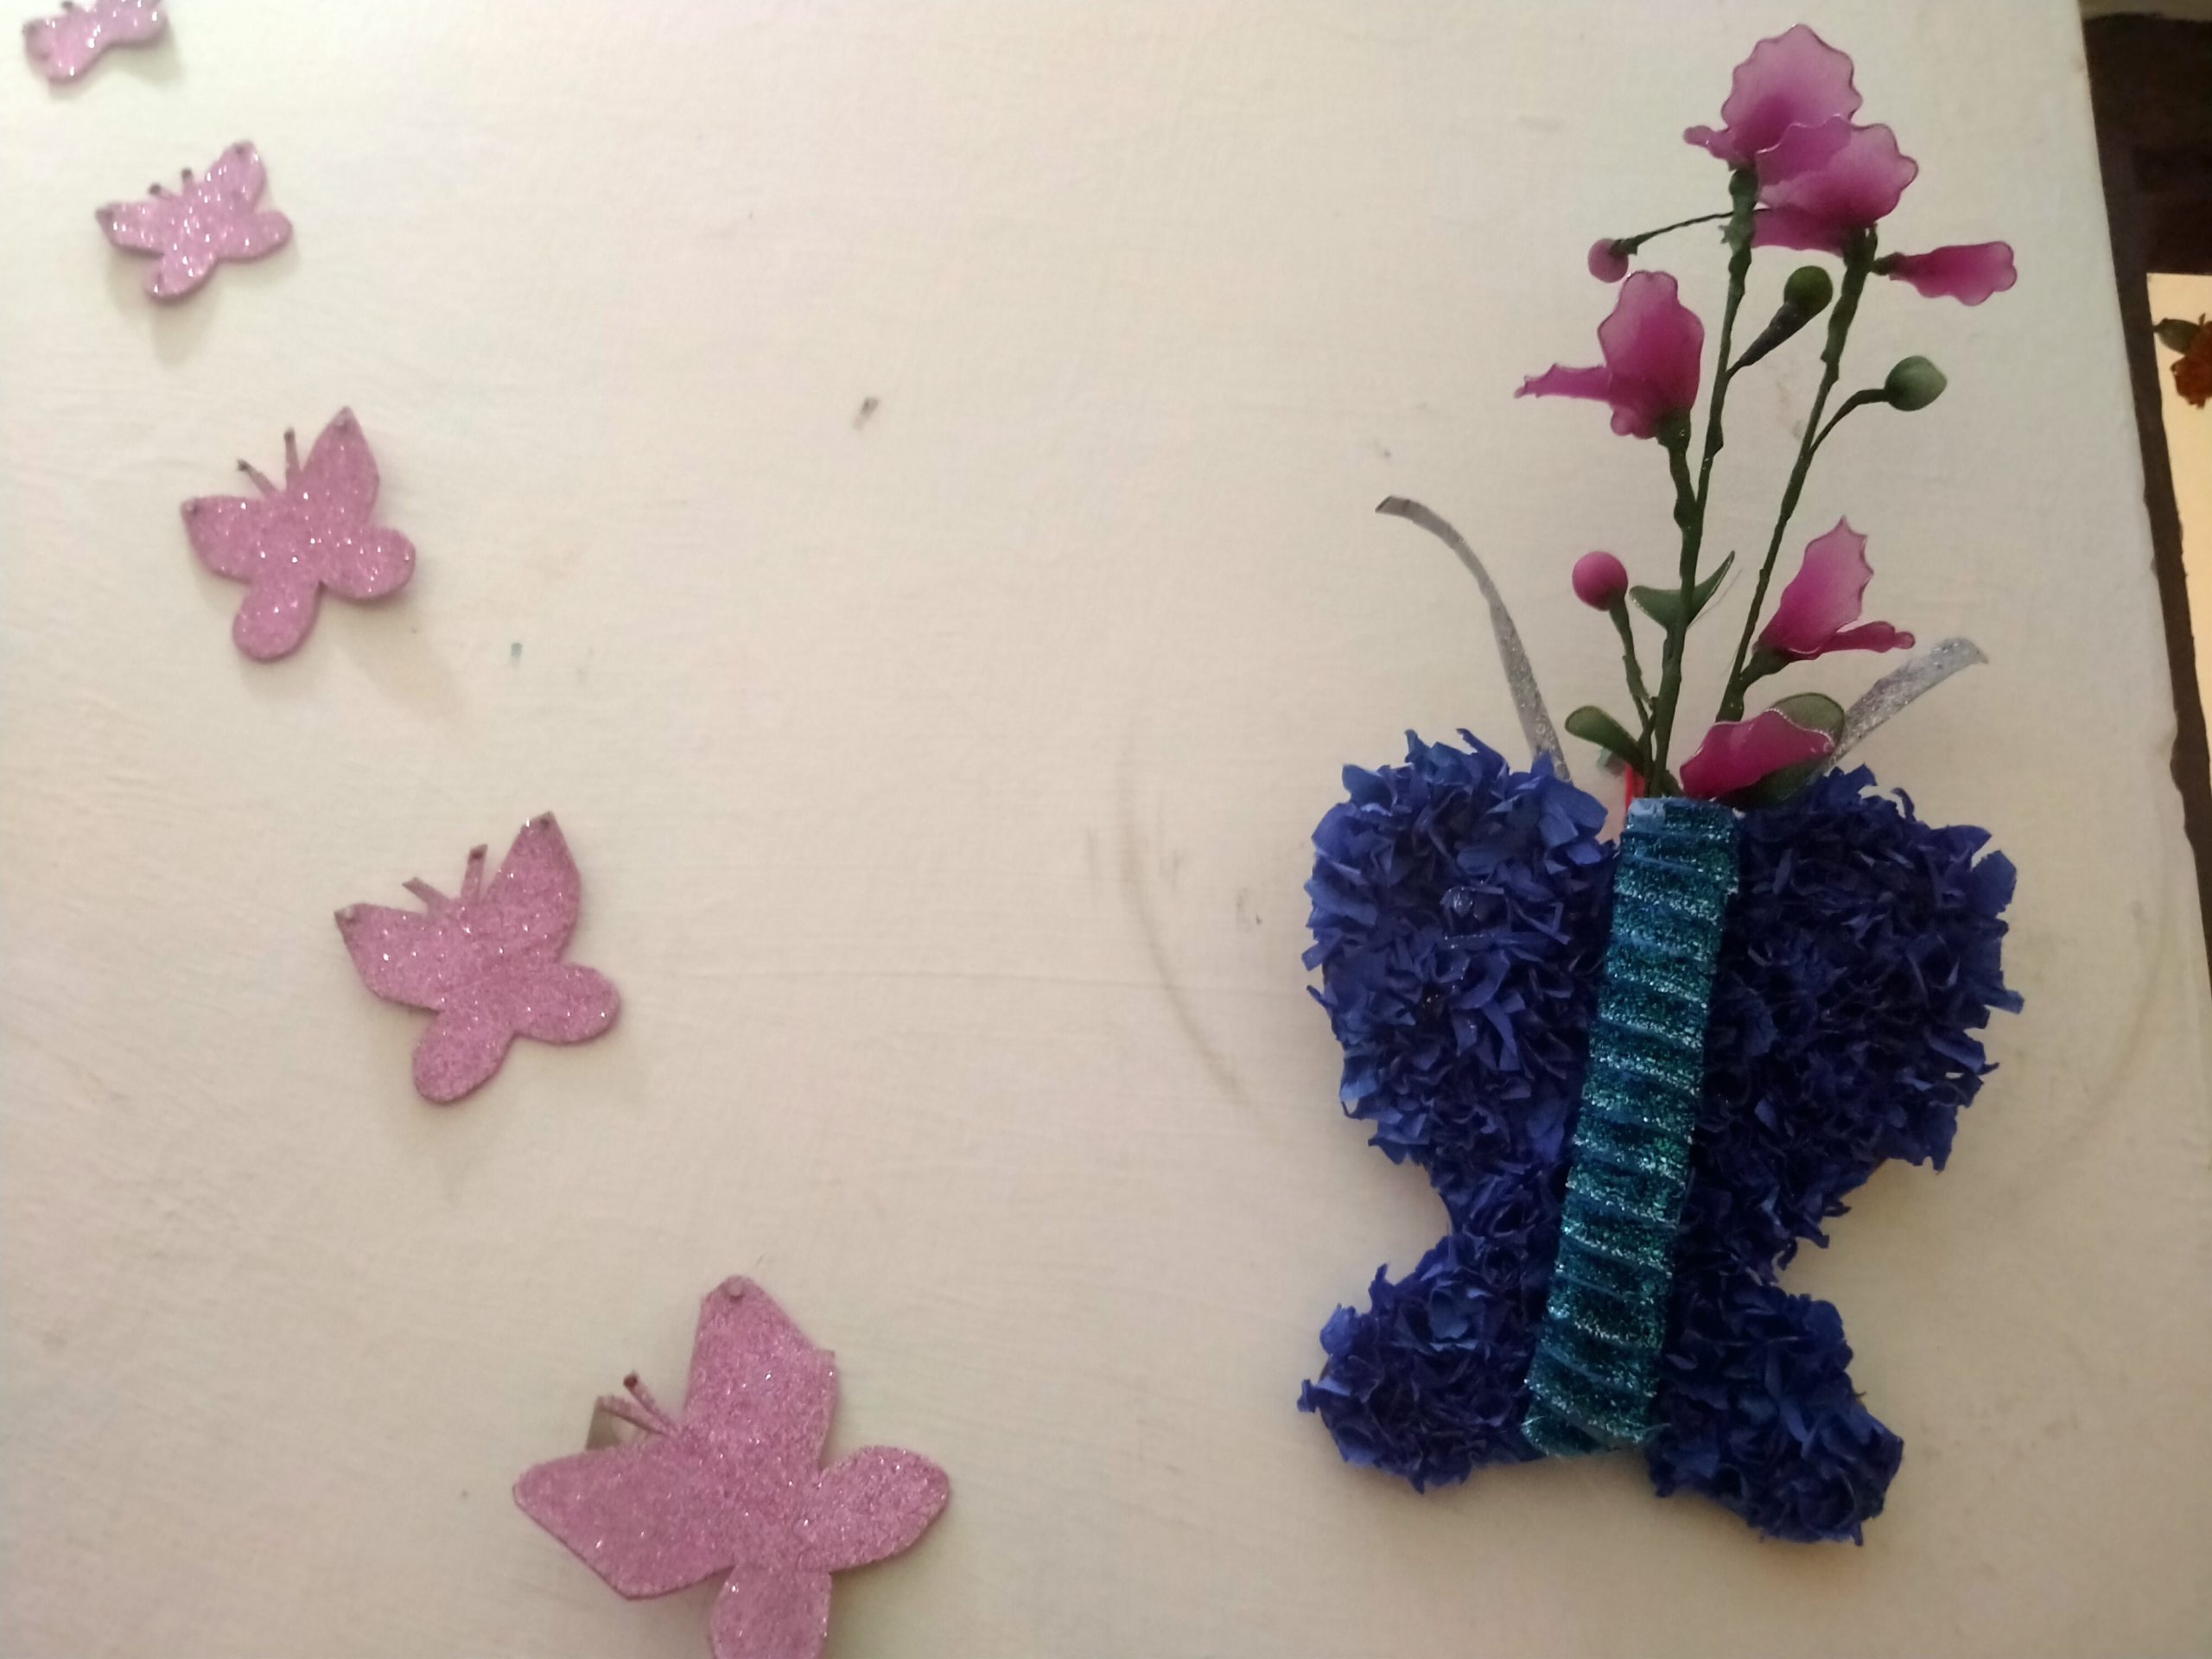 How to make butterfly flower vase?